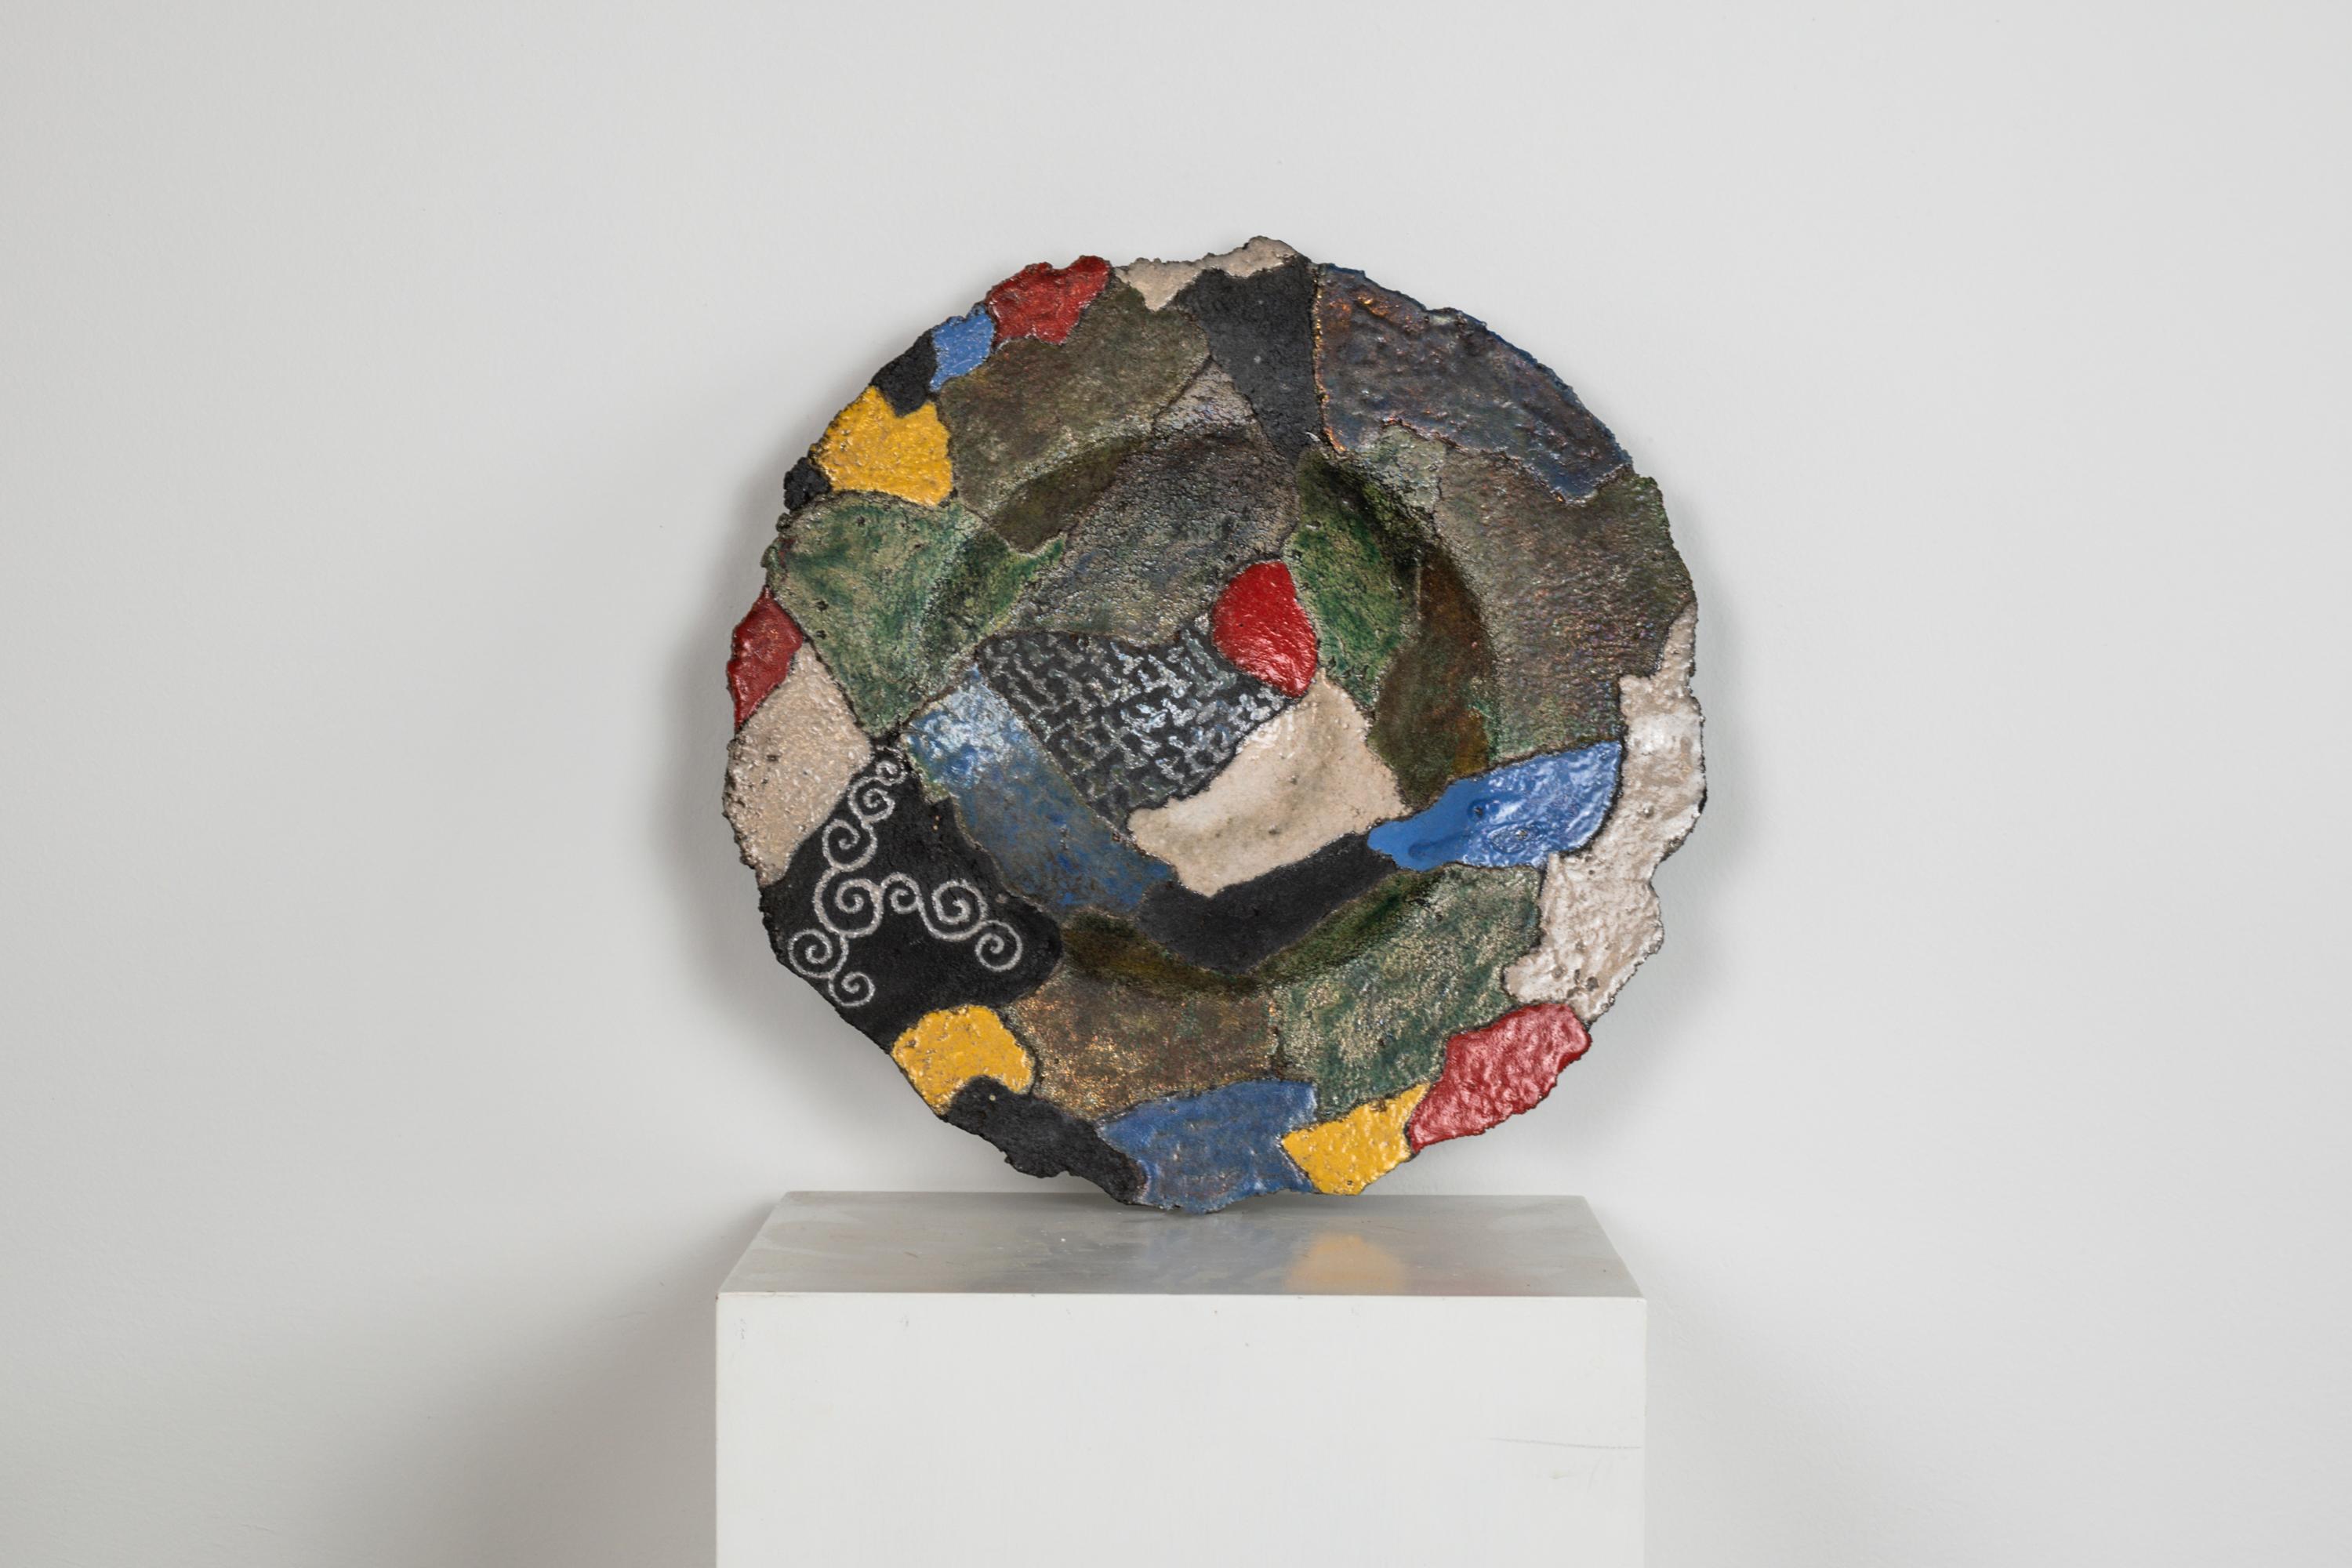 A beautiful and colorful decorative dish in polychrome ceramic manufactured by Giampaolo Mameli.
This ceramic dish from the 'Fragmenti' series mixed together different shades and texture obtained by the Raku technique, born in Japan in the 16th